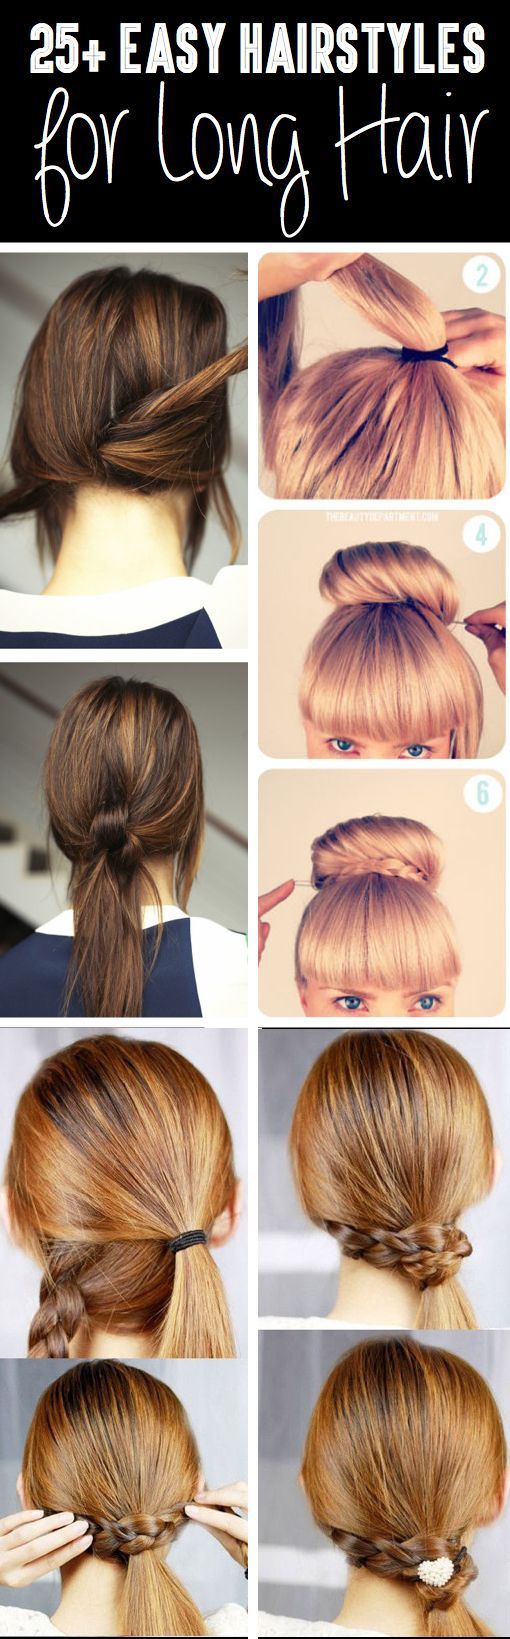 From Classy to Cute: 25+ Easy Hairstyles for Long HairFor when my hair grows back out:)